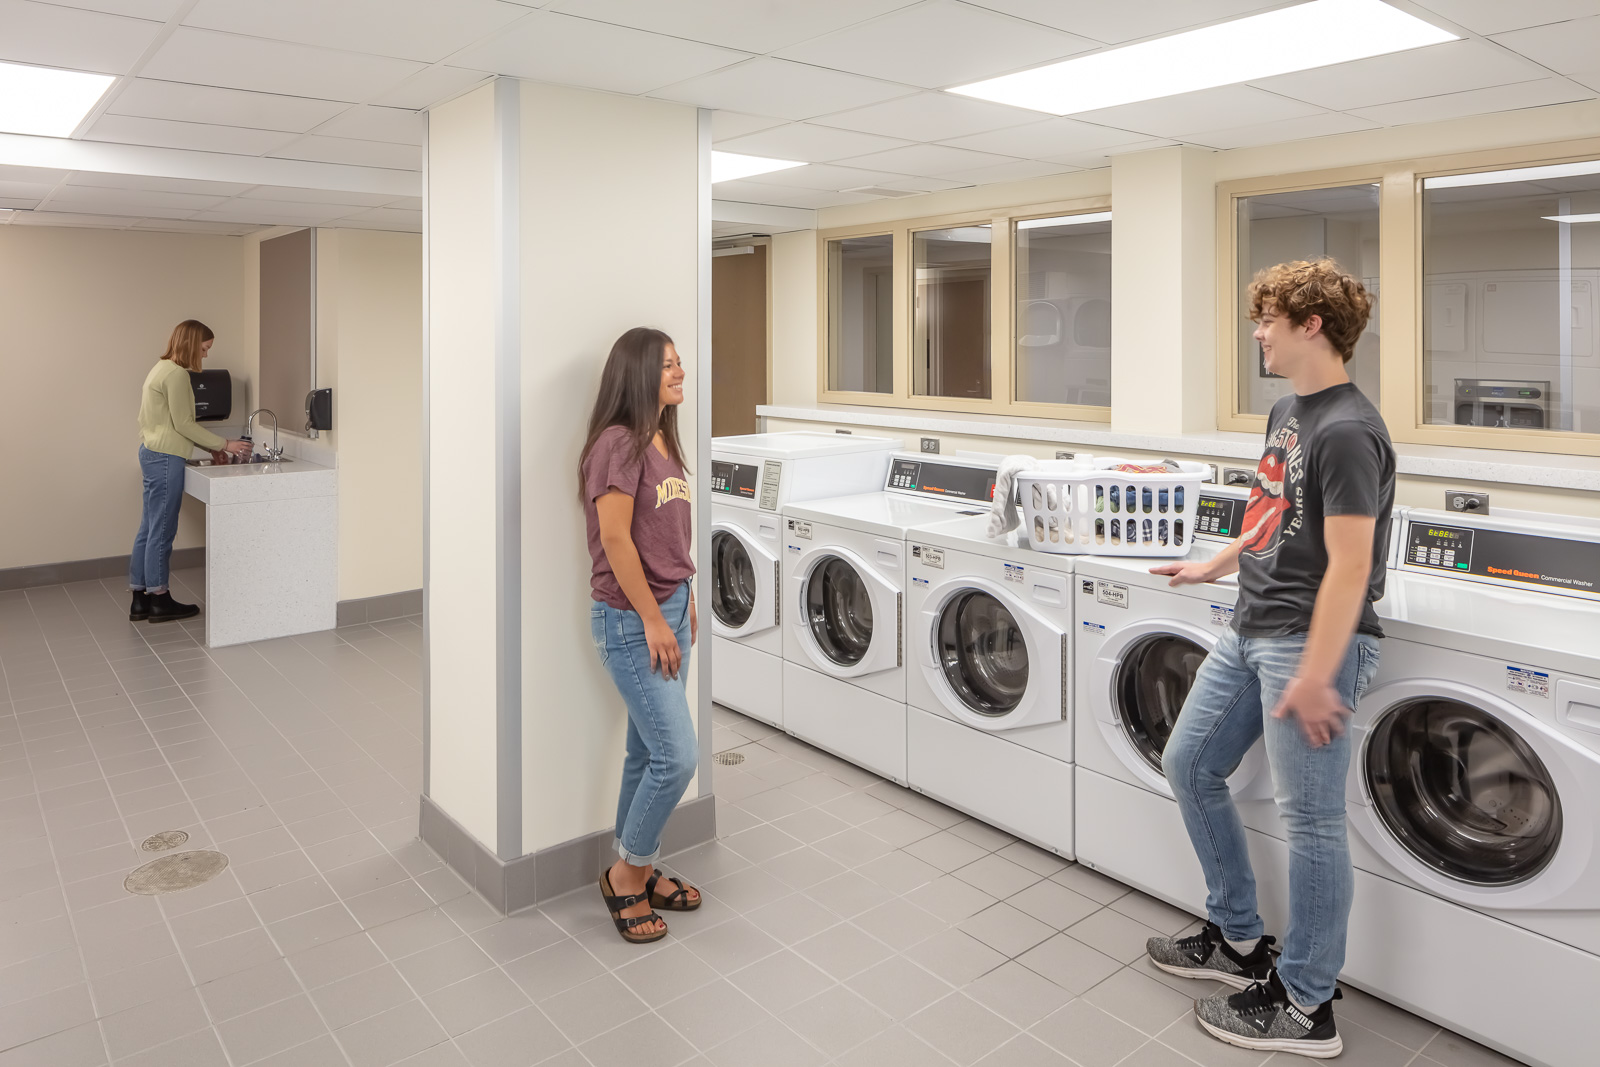 Two students stand beside each other and talk in an open, spacious laundry room alongside a row of washing machines. In the far left, a woman washes her hands at a sink.